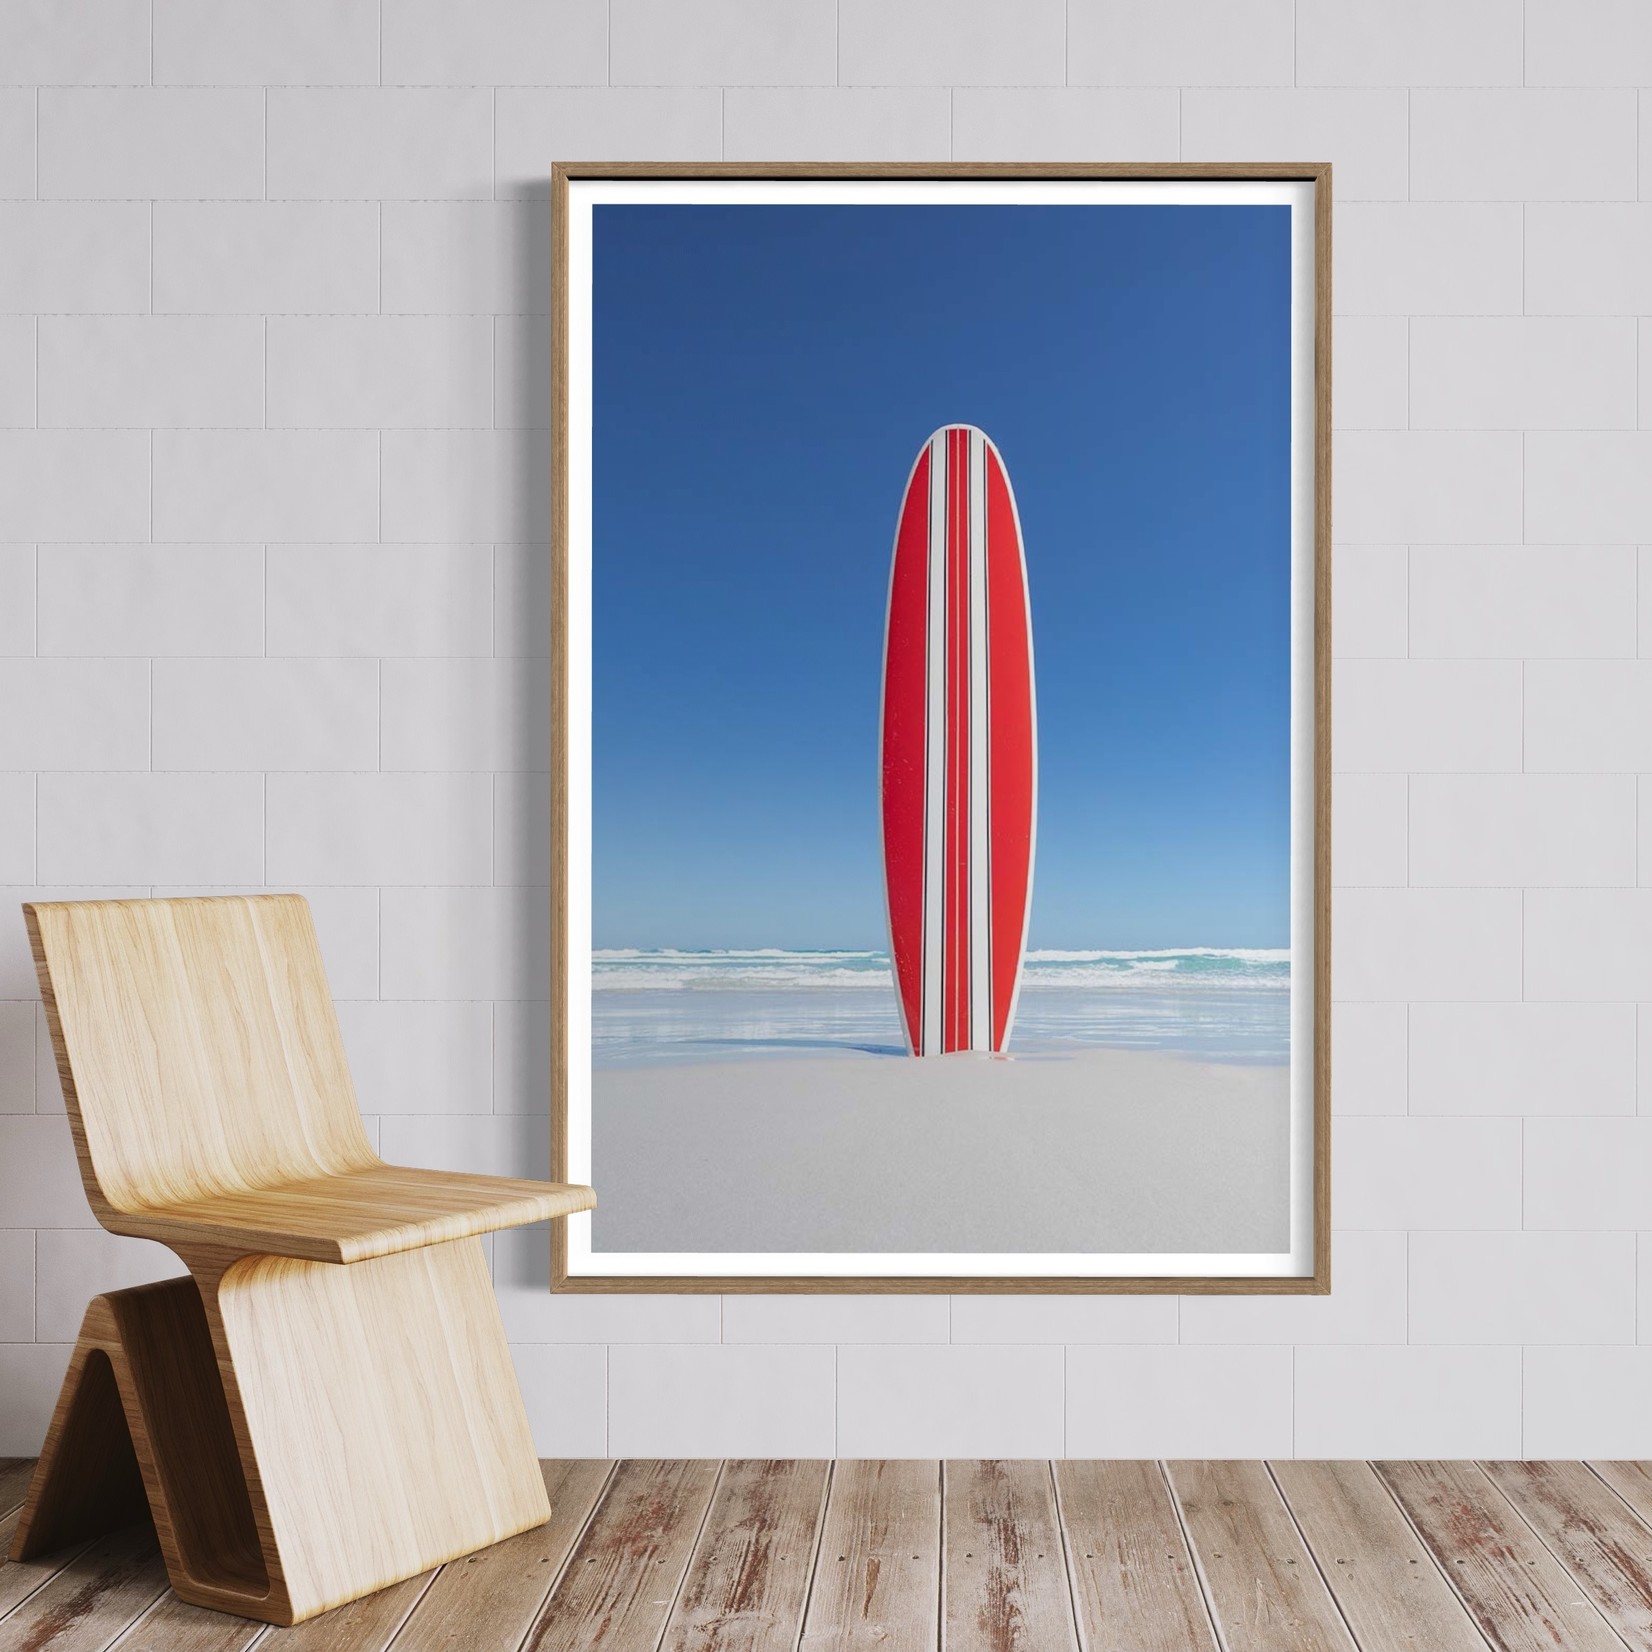 Getty Images Gallery Striped Retro Surfboard